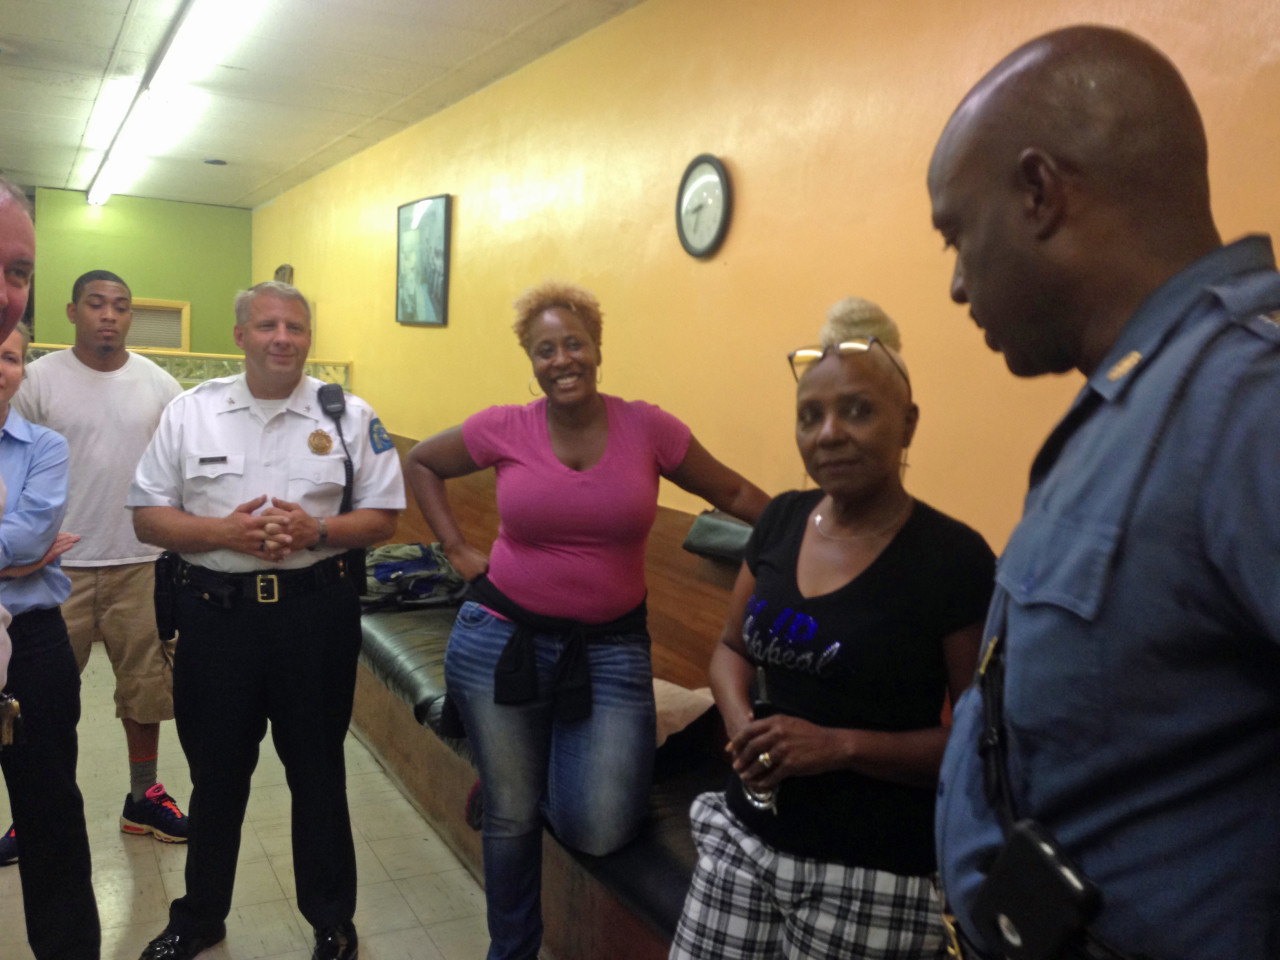 Missouri Highway Patrol Captain Ronald Johnson (right) speaks with community members including the owner of Clip Appeal barbershop, Kaye Mershon (second from right). (Deborah Becker)